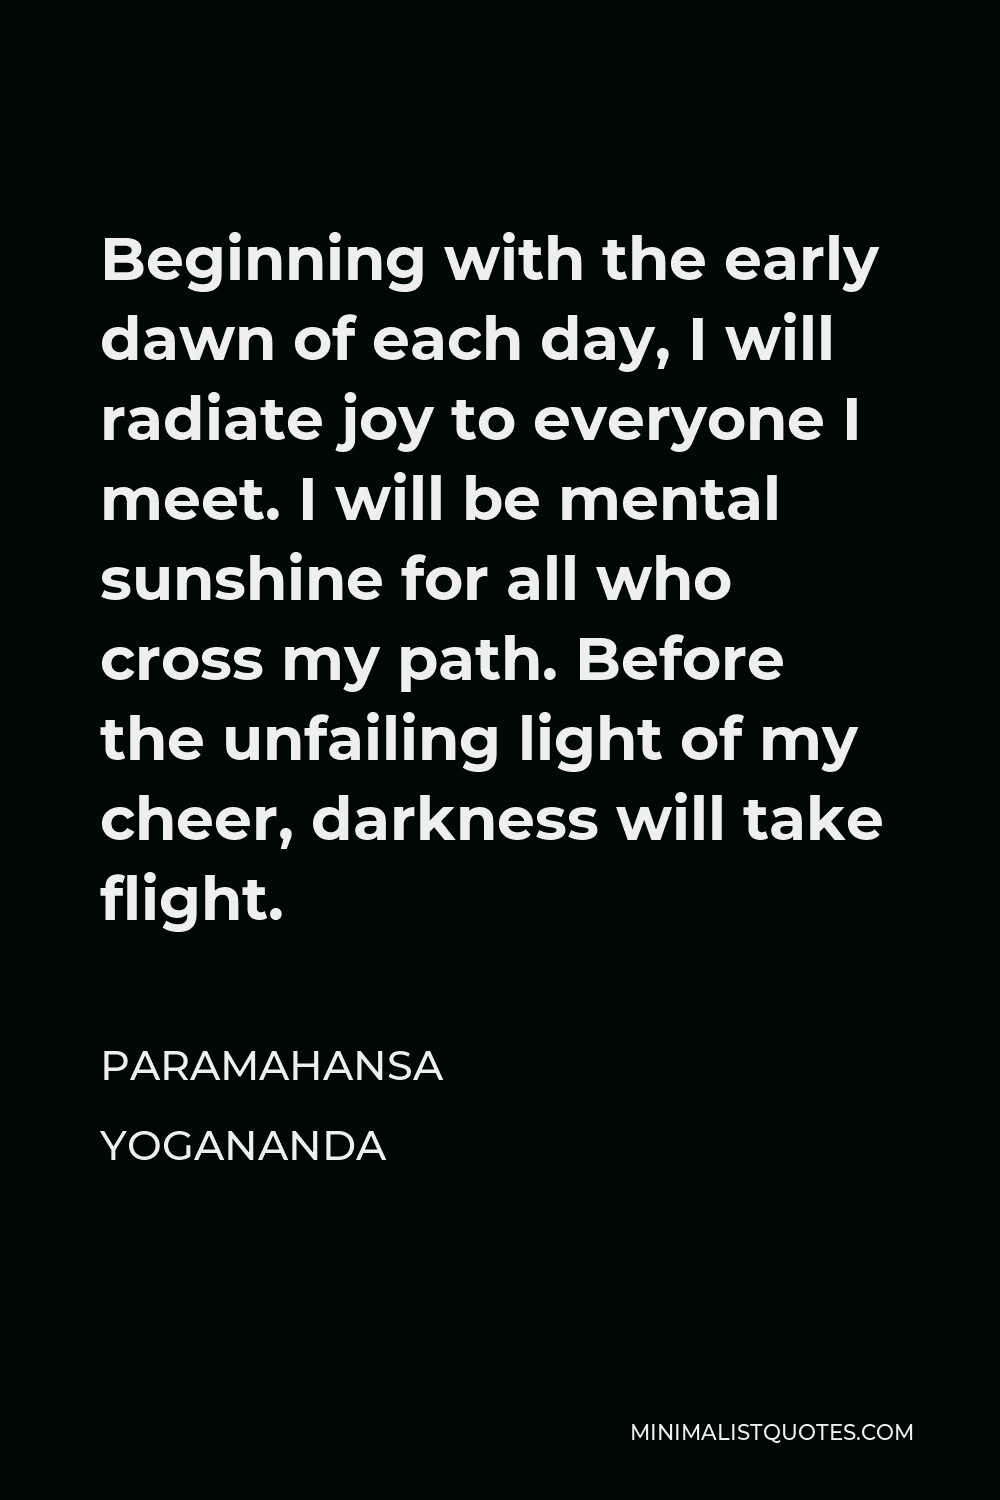 Paramahansa Yogananda Quote - Beginning with the early dawn of each day, I will radiate joy to everyone I meet. I will be mental sunshine for all who cross my path. Before the unfailing light of my cheer, darkness will take flight.